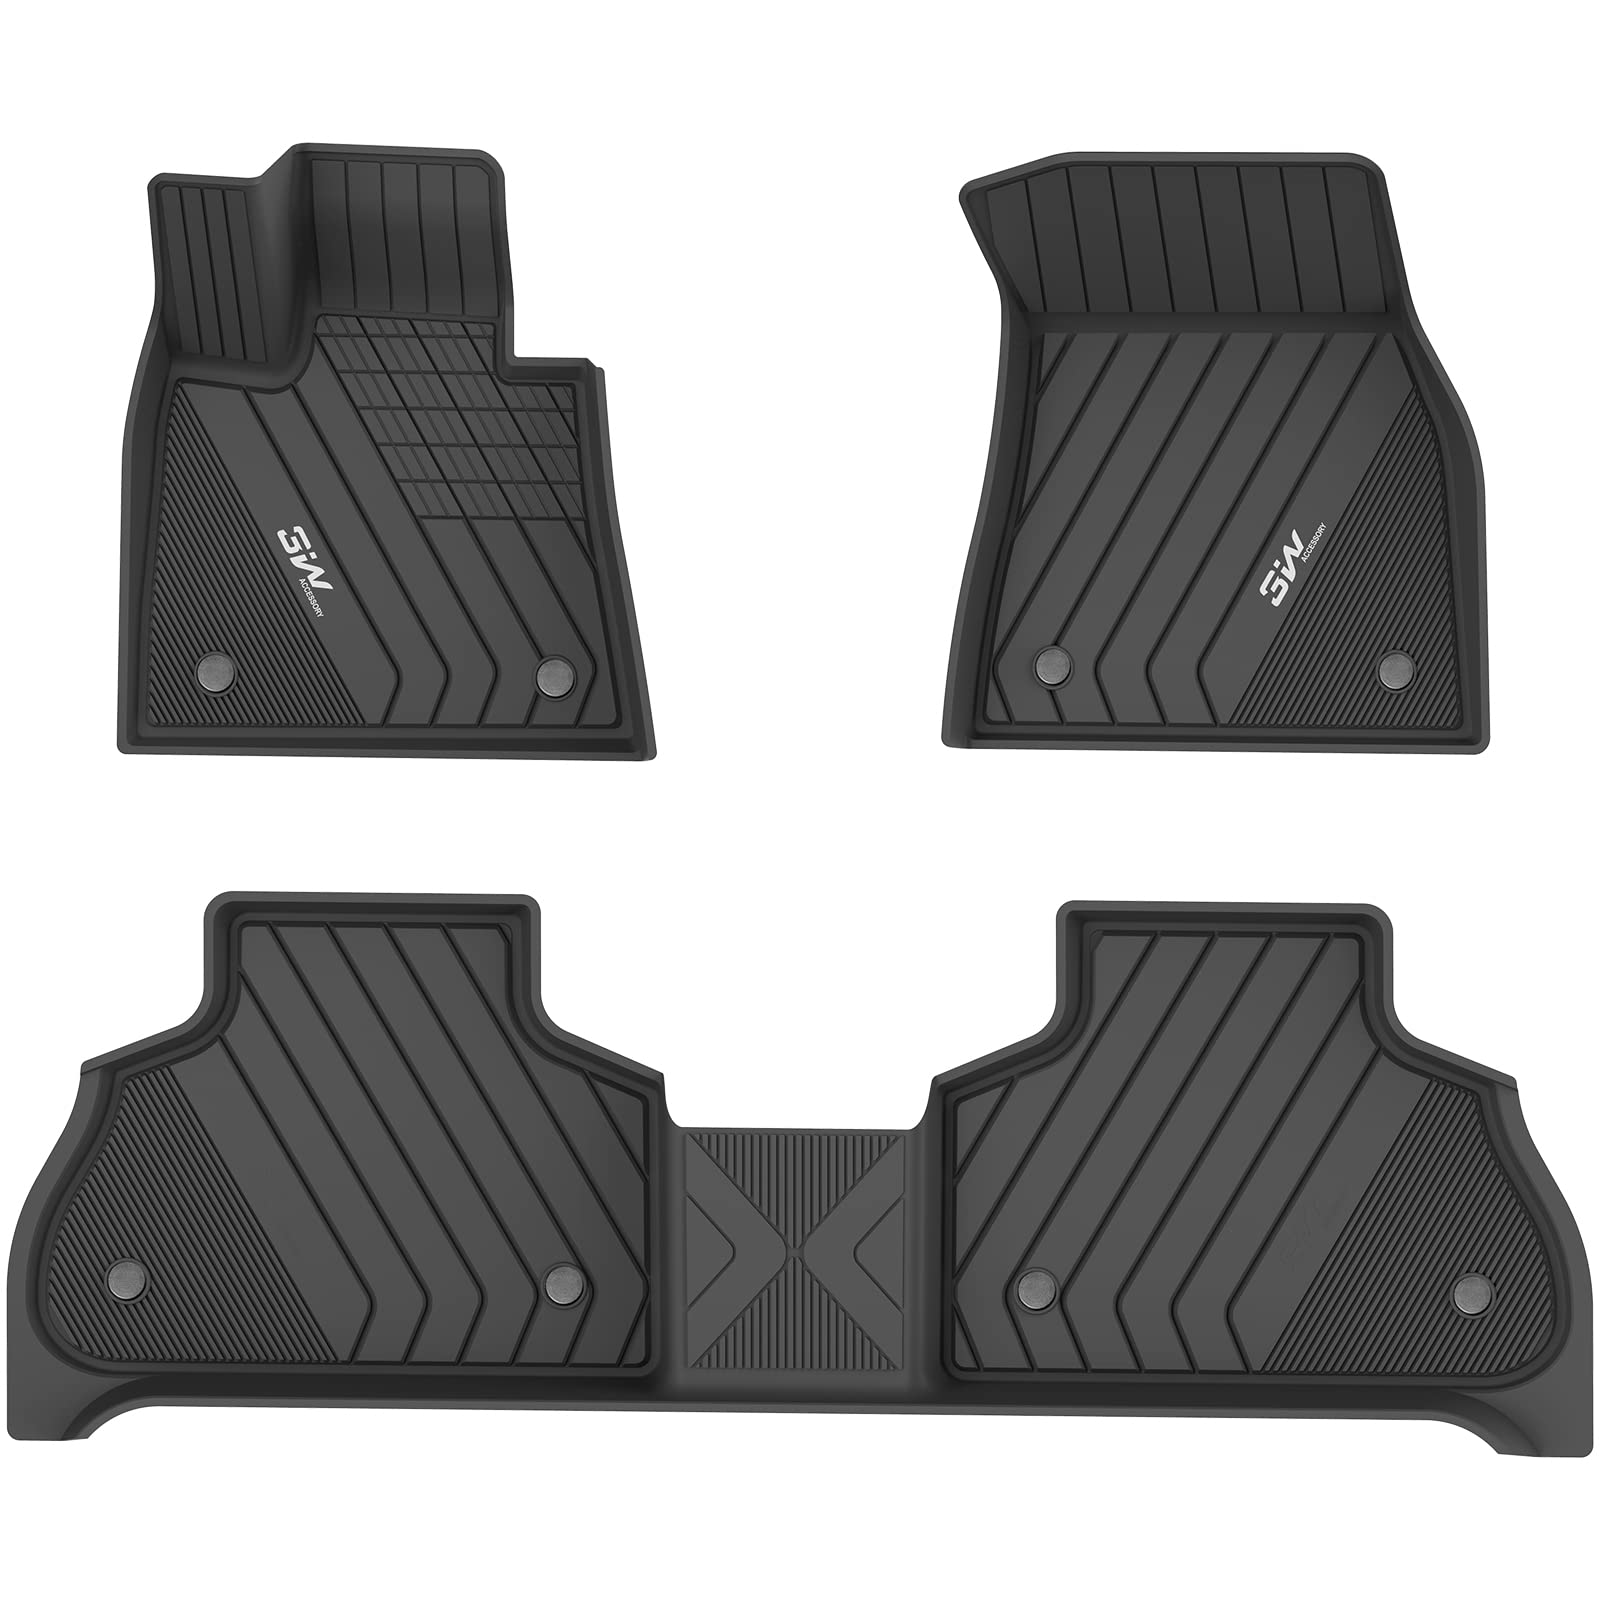 3W BMW X7 2019-2024 7 Seats Custom Floor Mats TPE Material & All-Weather Protection Vehicles & Parts 3Wliners 2019-2024 7-Seat X7 1st&2nd Row Mats